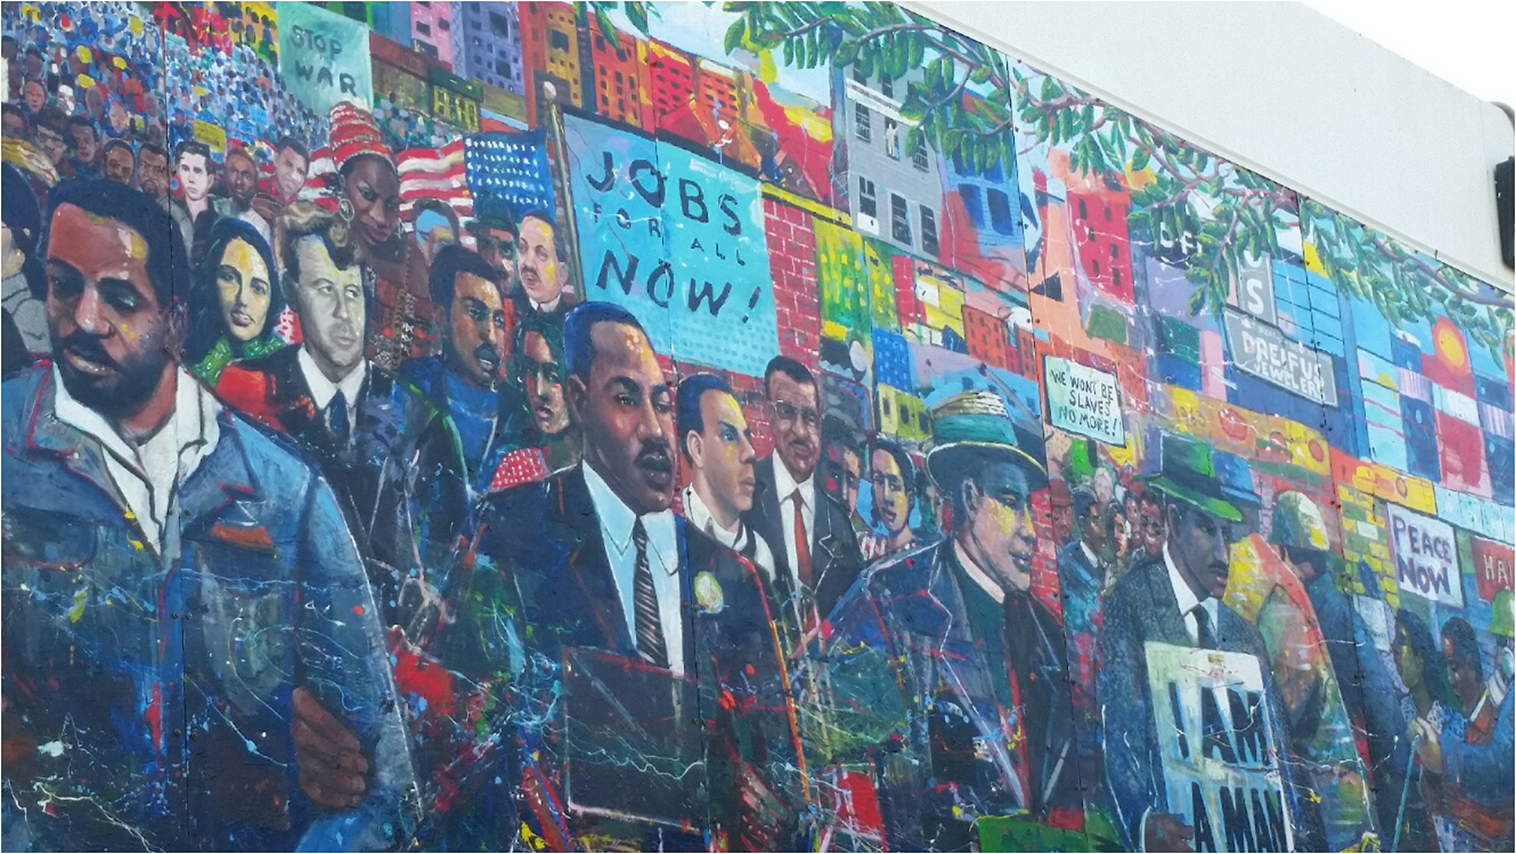 image of a mural filled with civil rights leaders and social justice advocates